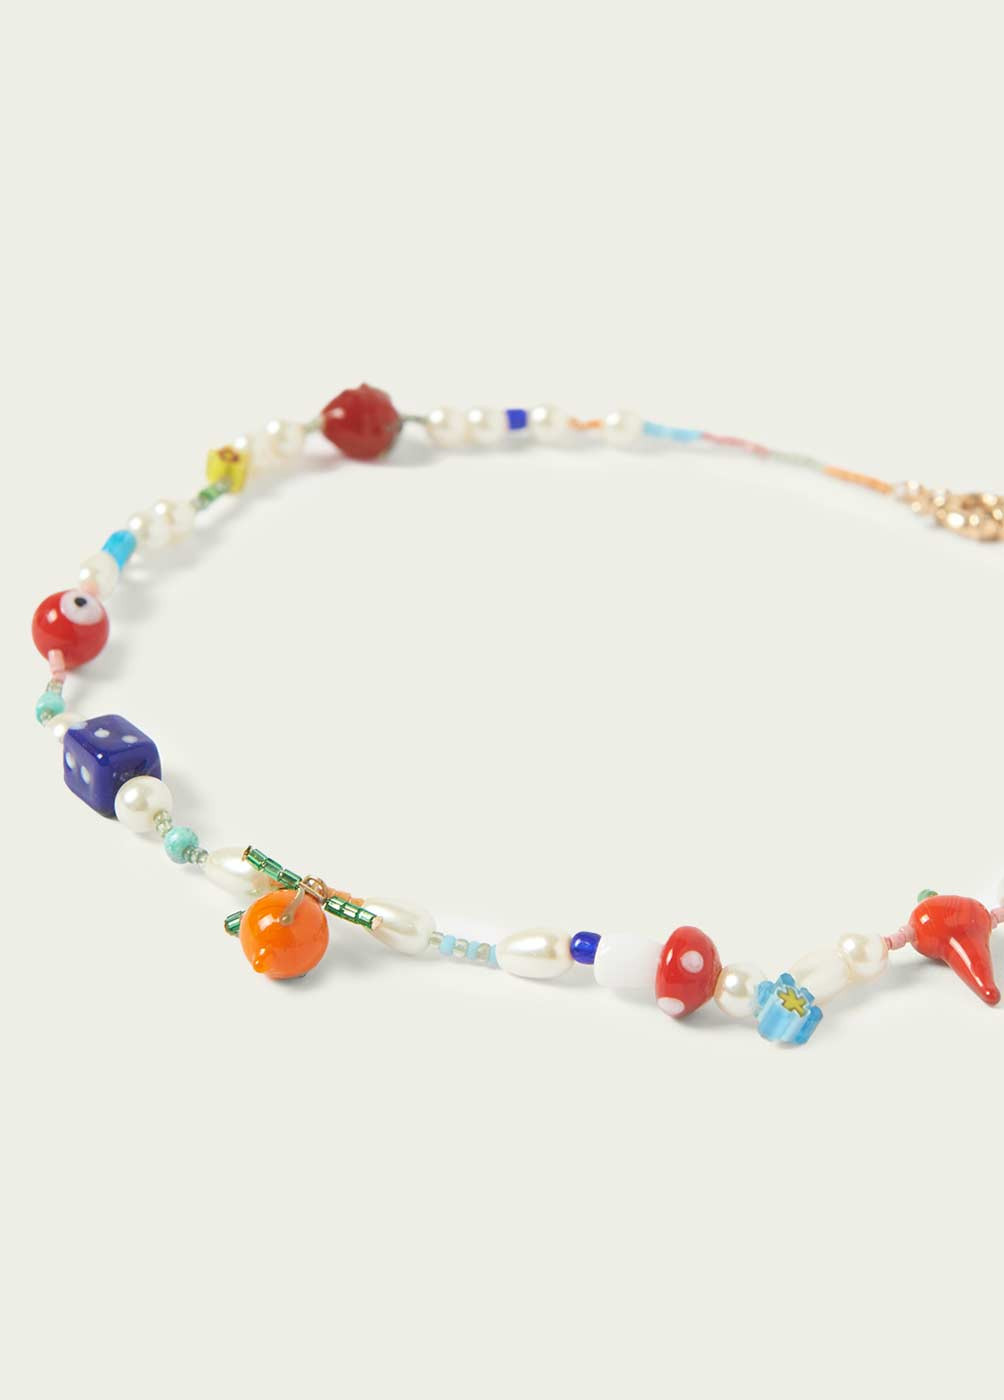 GLASS-BEADED NECKLACE